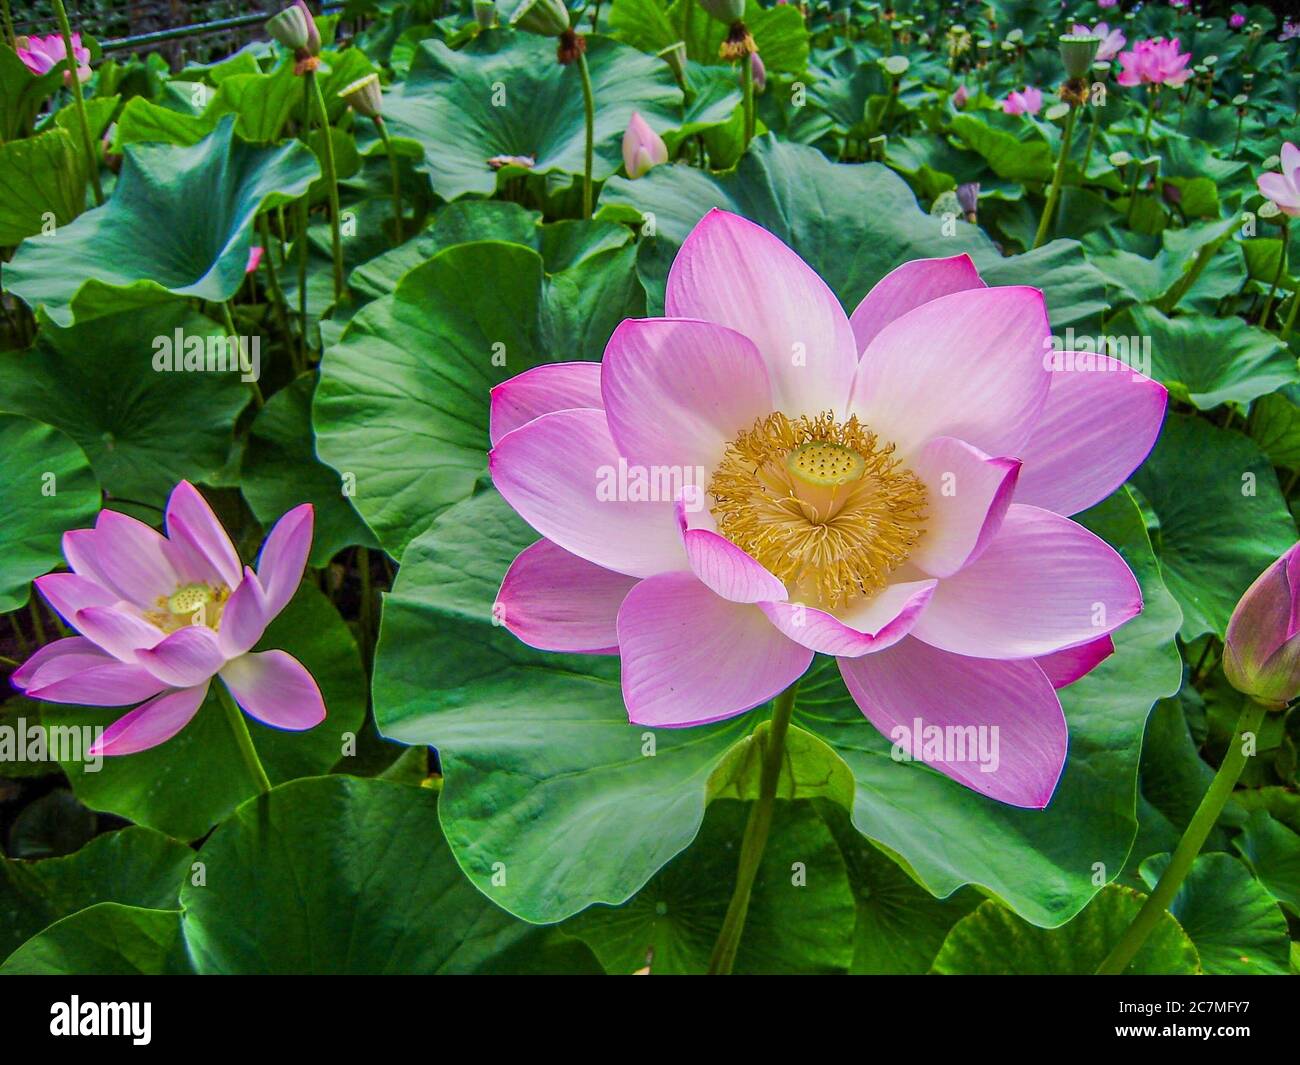 Pink Indian lotus flowers surrounded by green plants Stock Photo